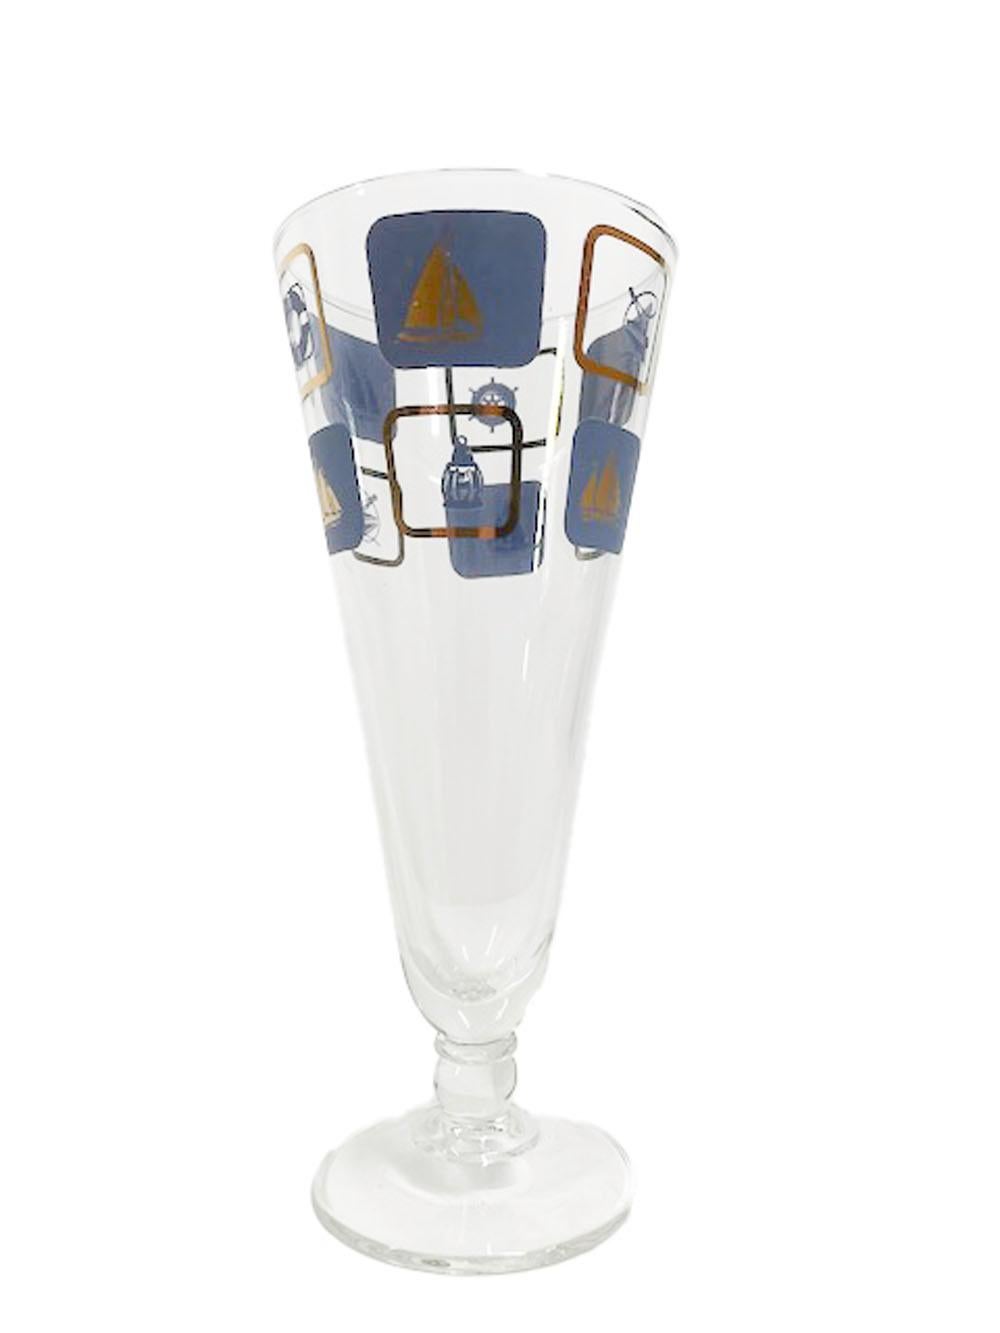 Vintage Nautical Themed Pilsner Glasses Decorated in Blue Enamel and 22k Gold In Good Condition For Sale In Nantucket, MA